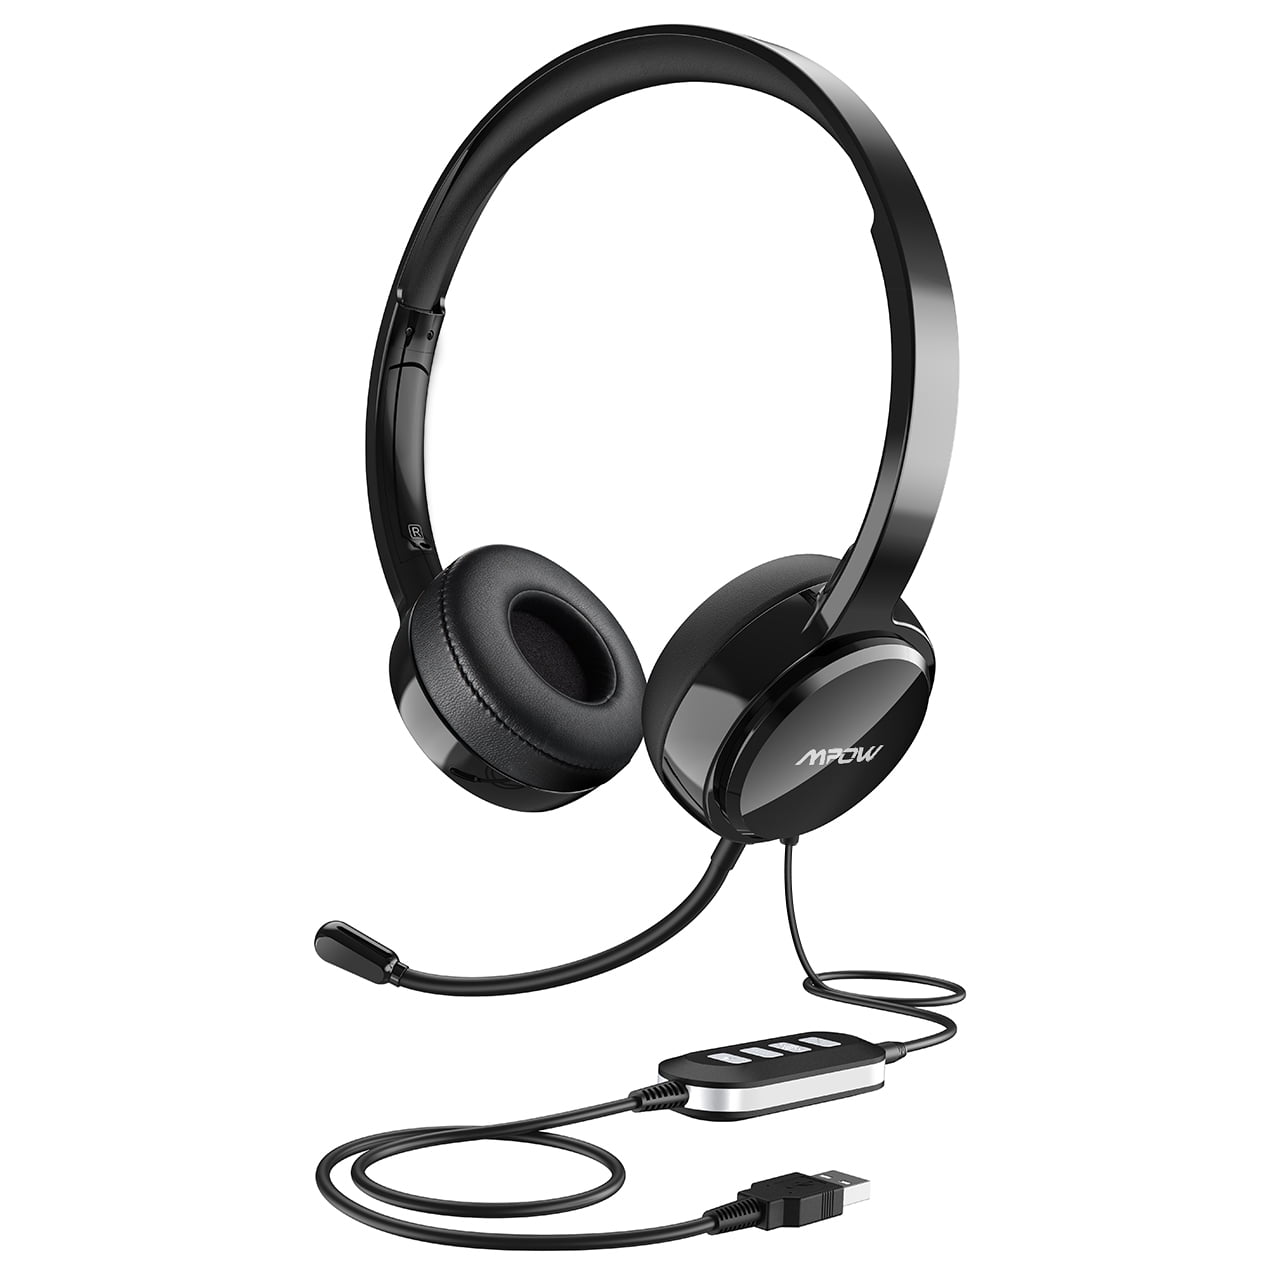 270 Degree Boom Mic Soulsens Computer Headset with Microphone in-line Control with Mute for MS Comfort-fit 3.5mm Headset with Mic for Laptop Noise-canceling USB Headphones Online Class Webinar 